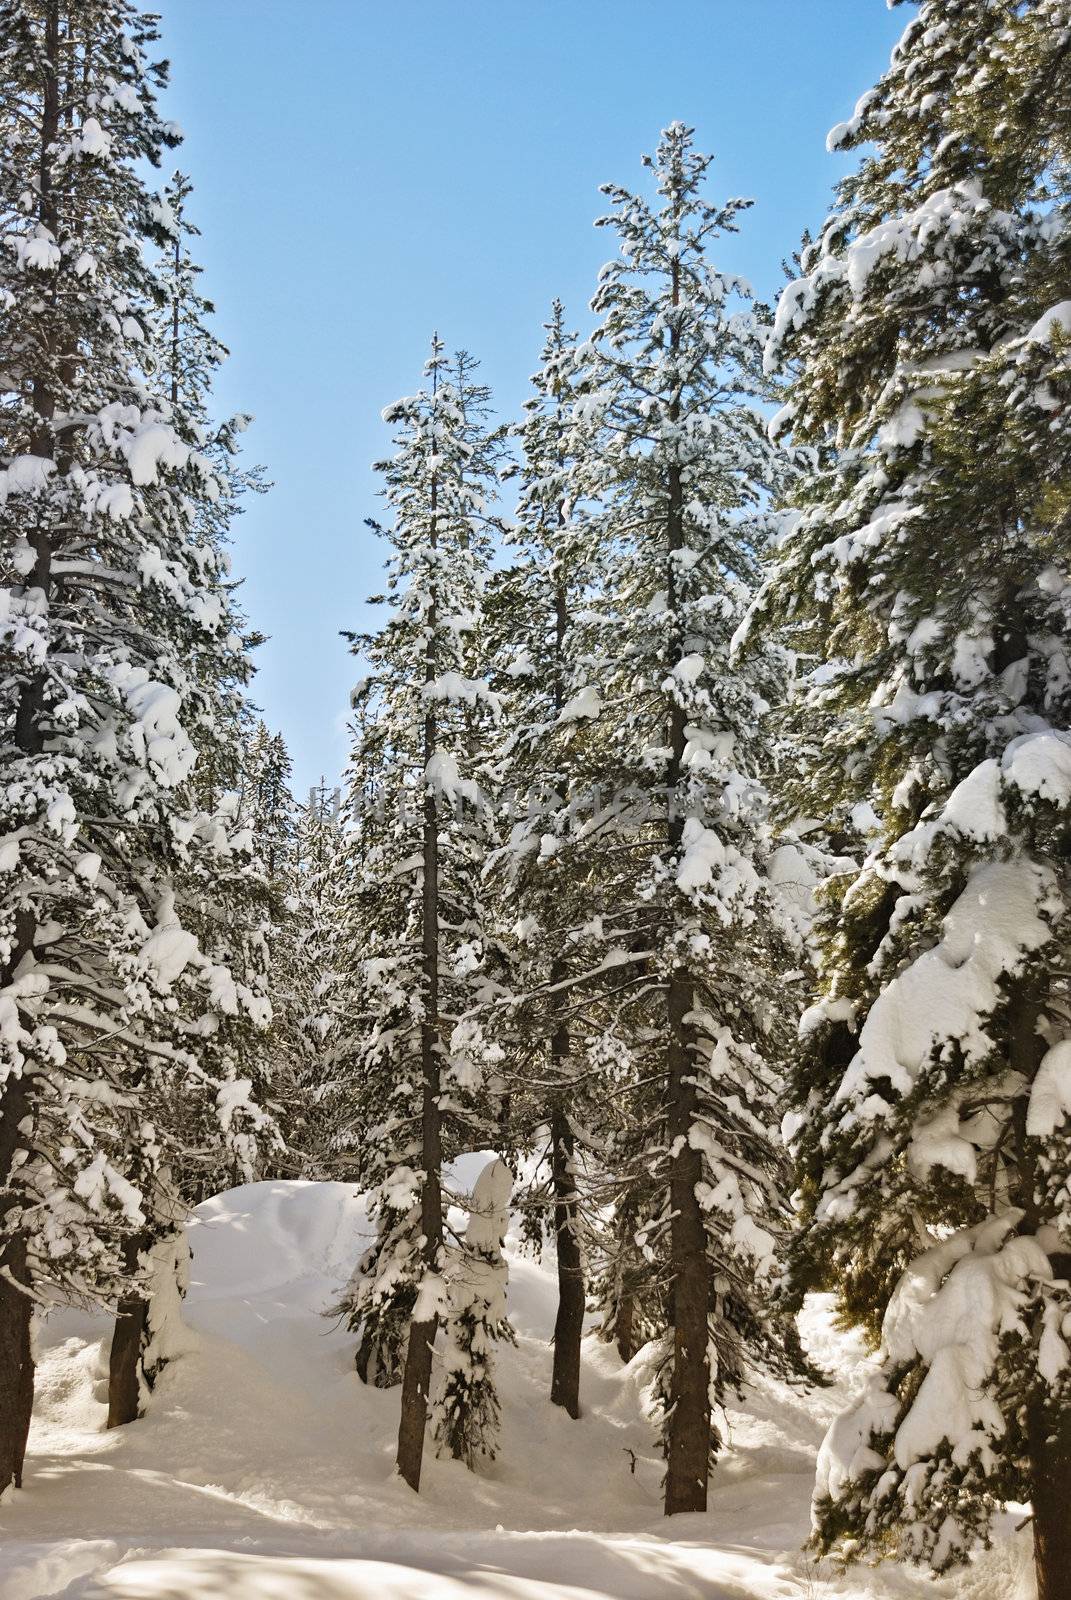 Tahoe conifers by whitechild